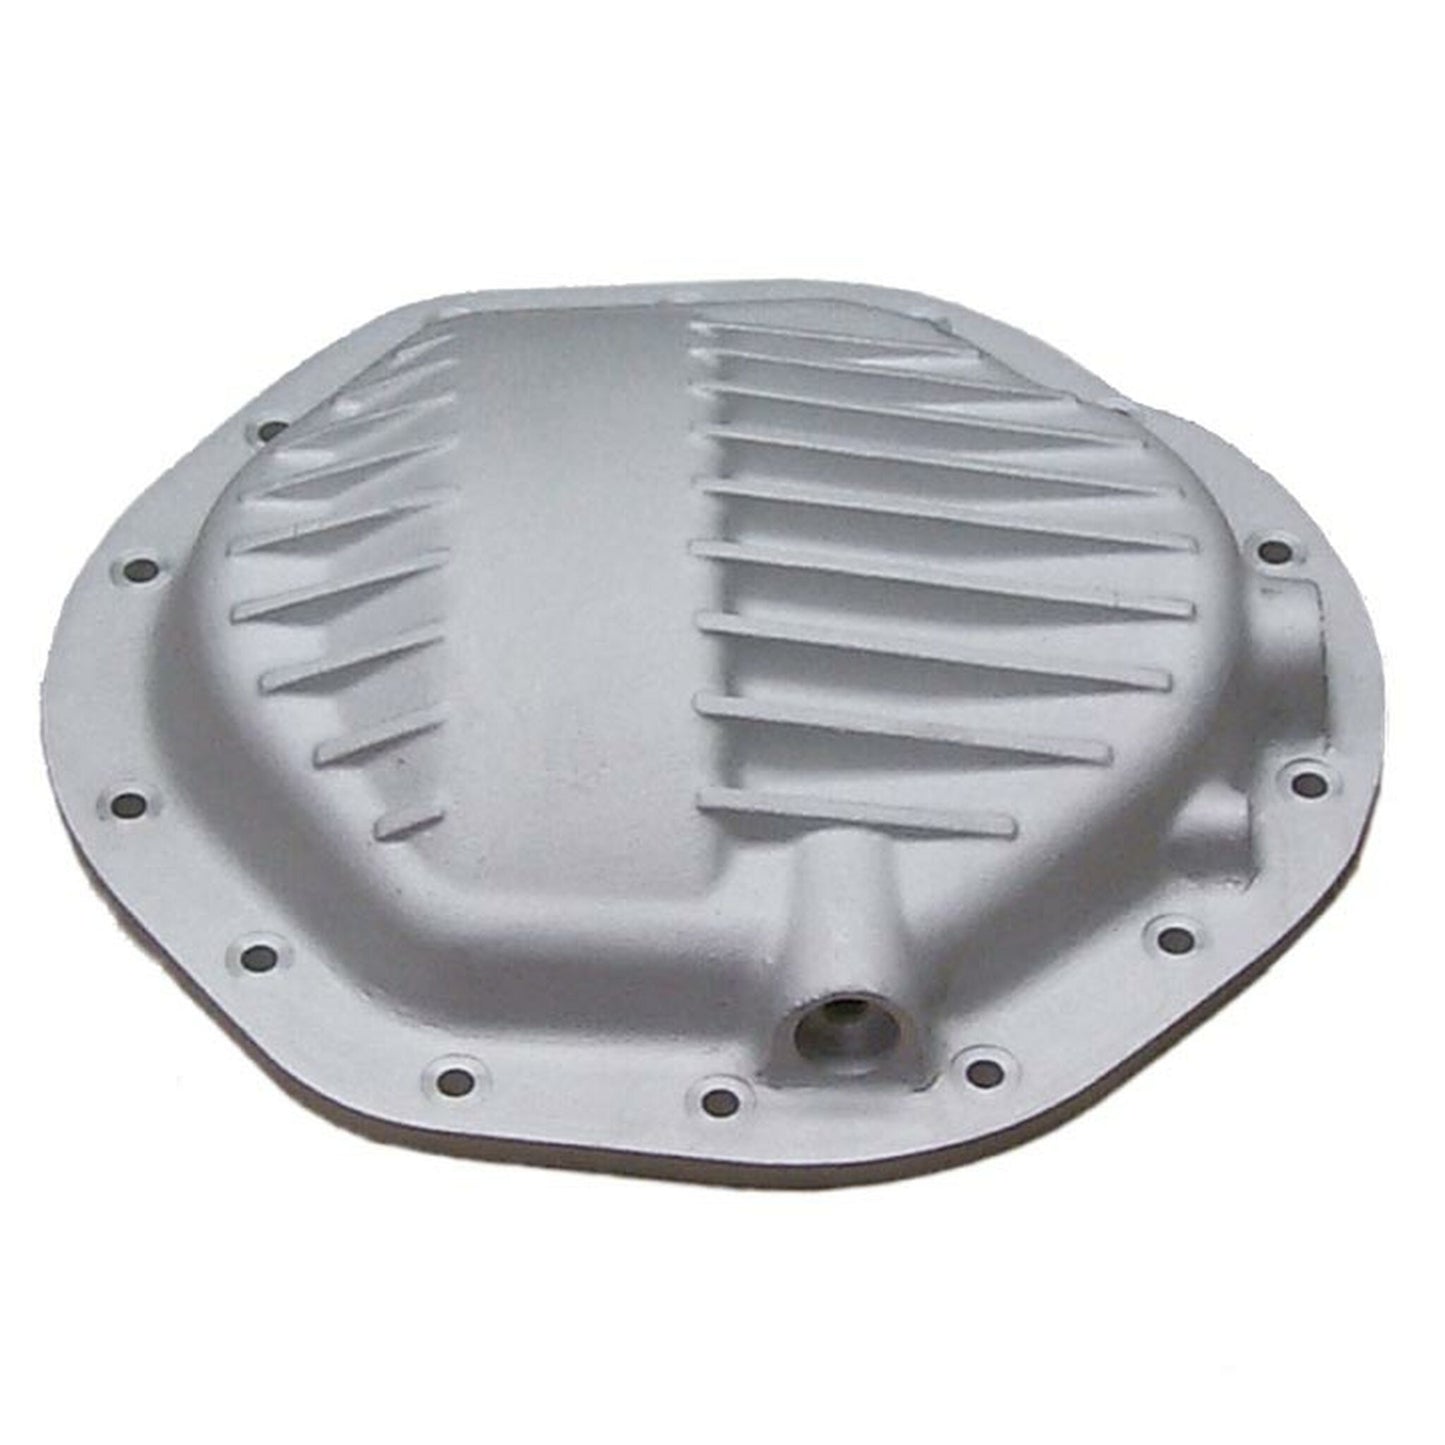 GM 9.5" Differential Cover 3.25" Depth